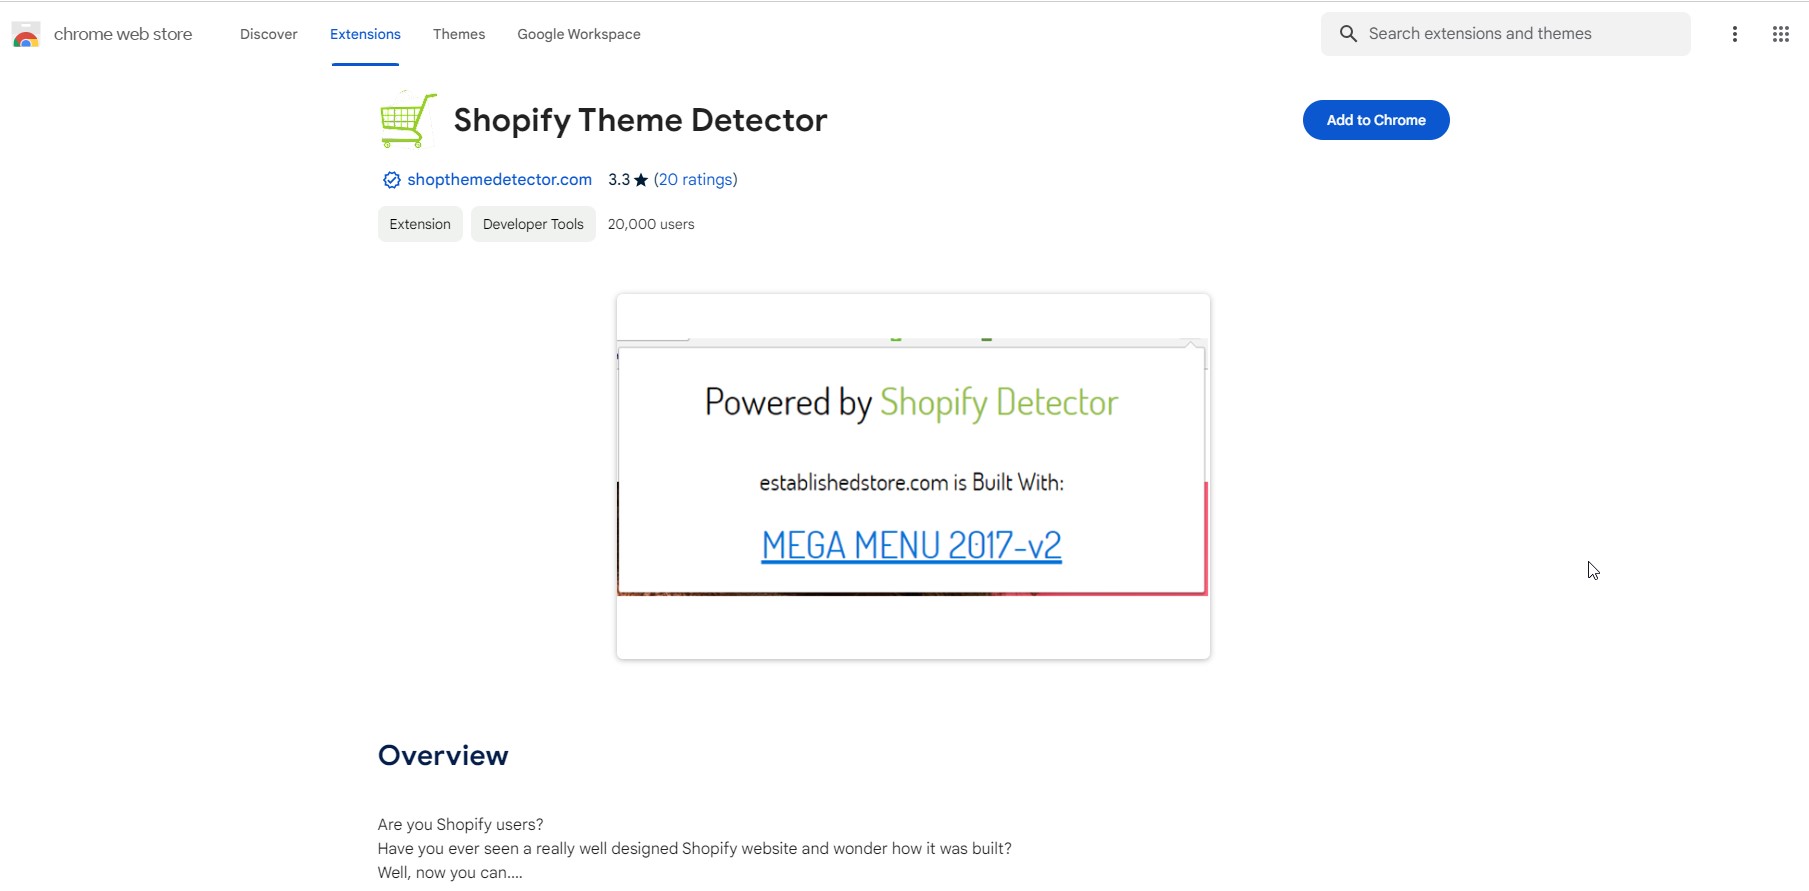 Shopify Theme Detector Extension